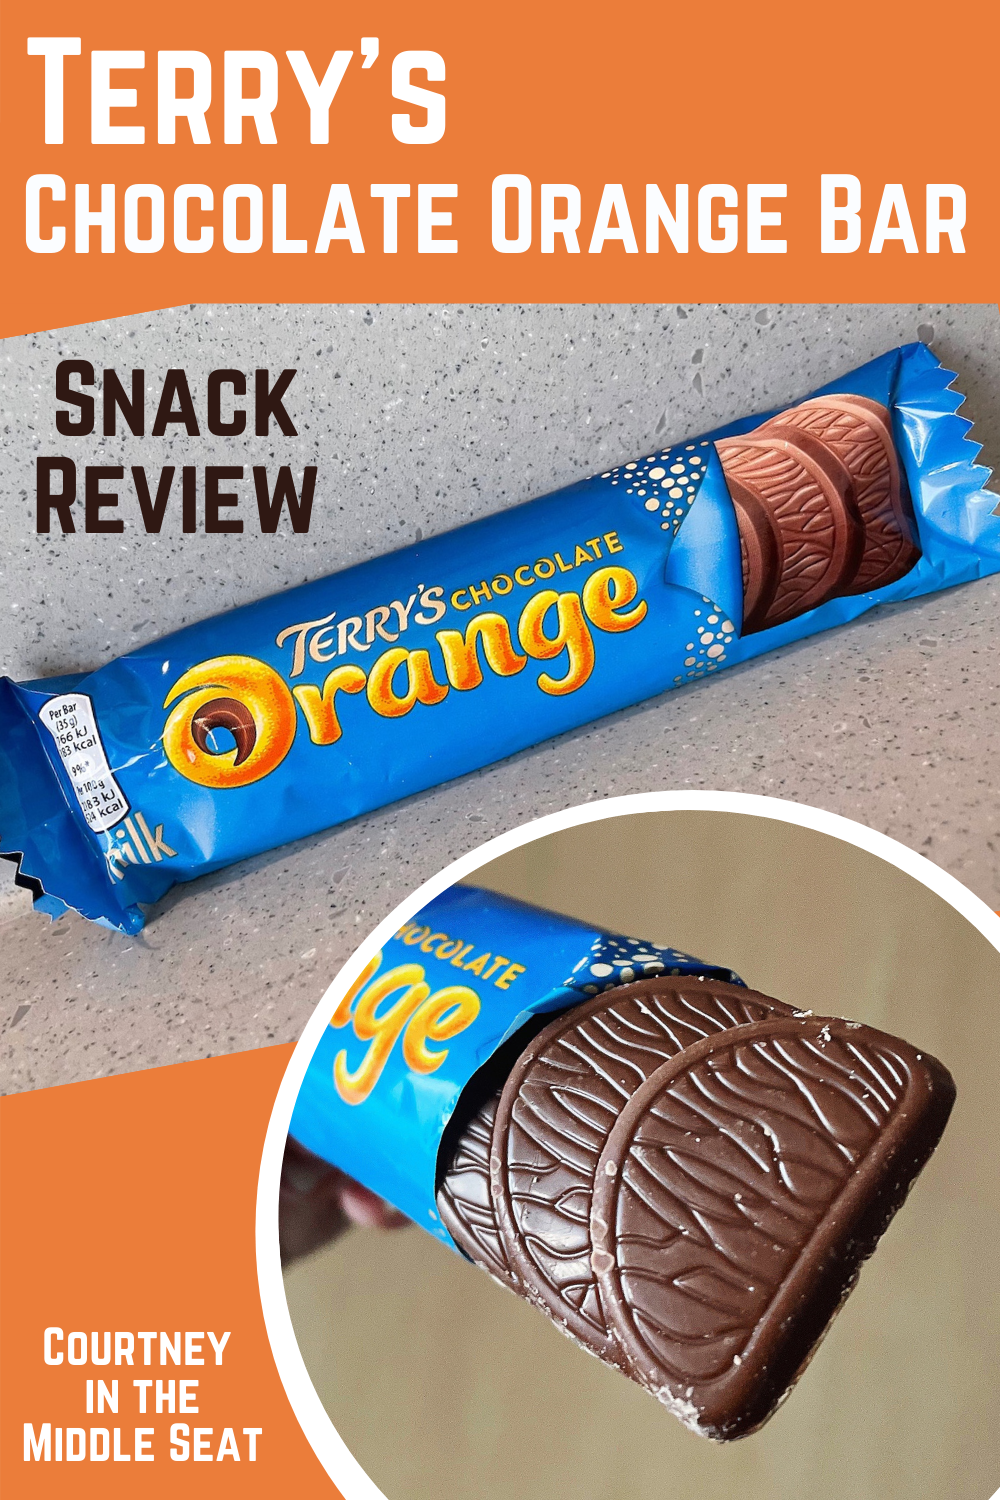 Pinterest Pin for a Snack Review of Terry's Chocolate Orange Bar